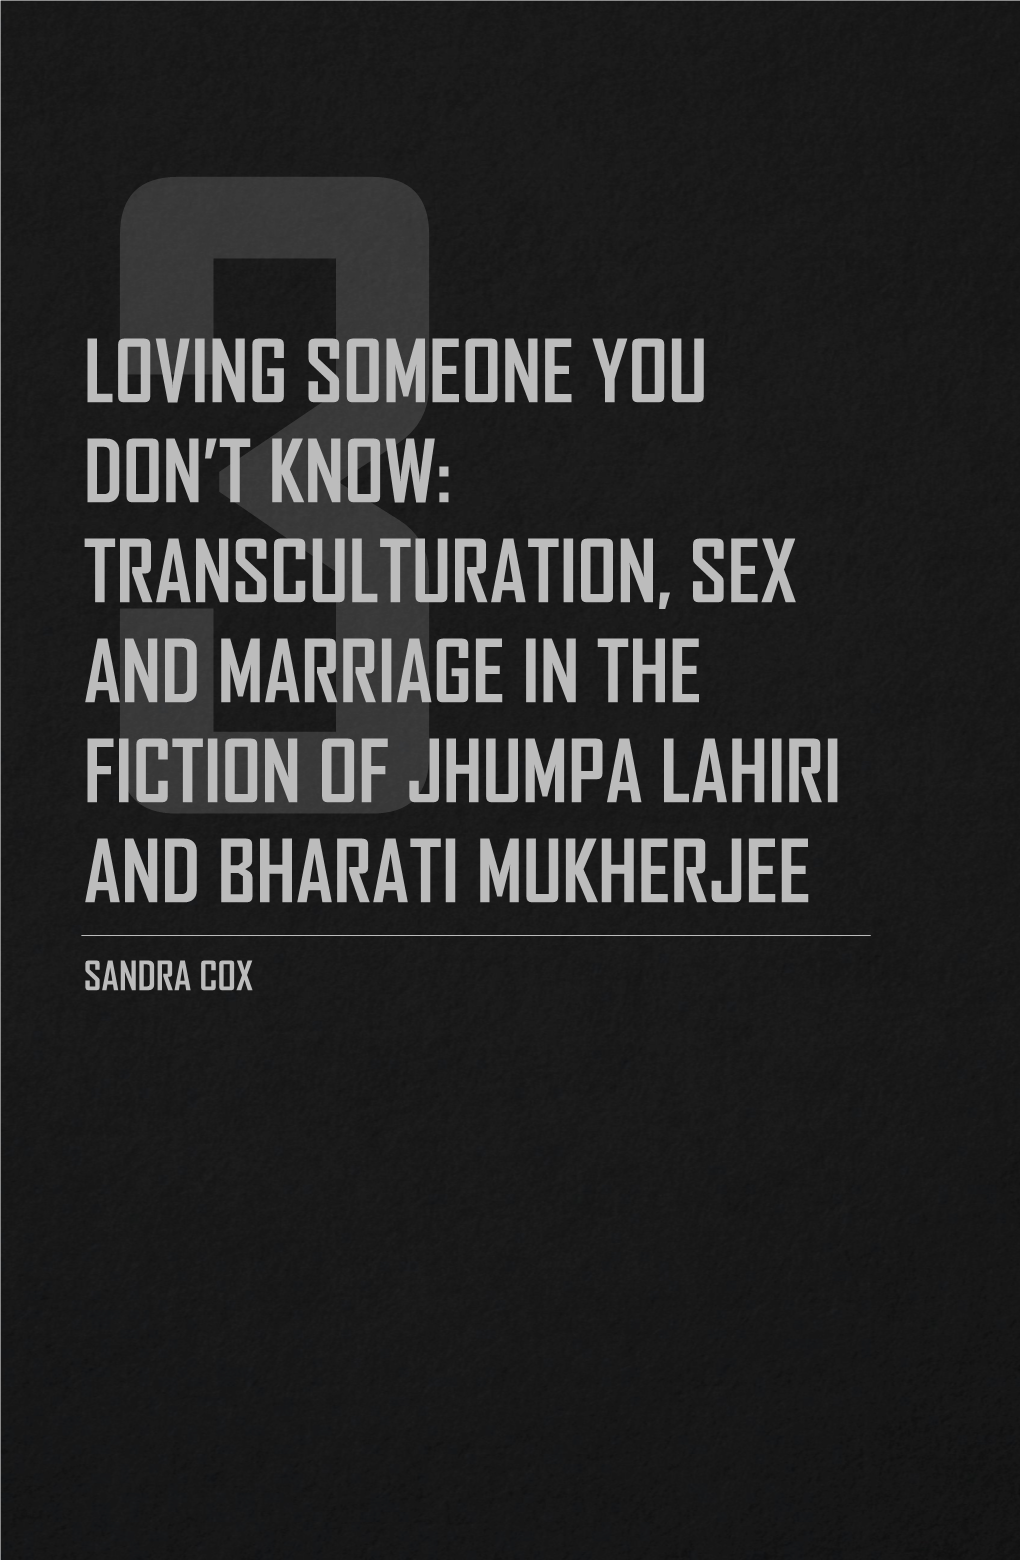 Transculturation, Sex and Marriage in the Fiction of Jhumpa Lahiri and Bharati Mukherjee